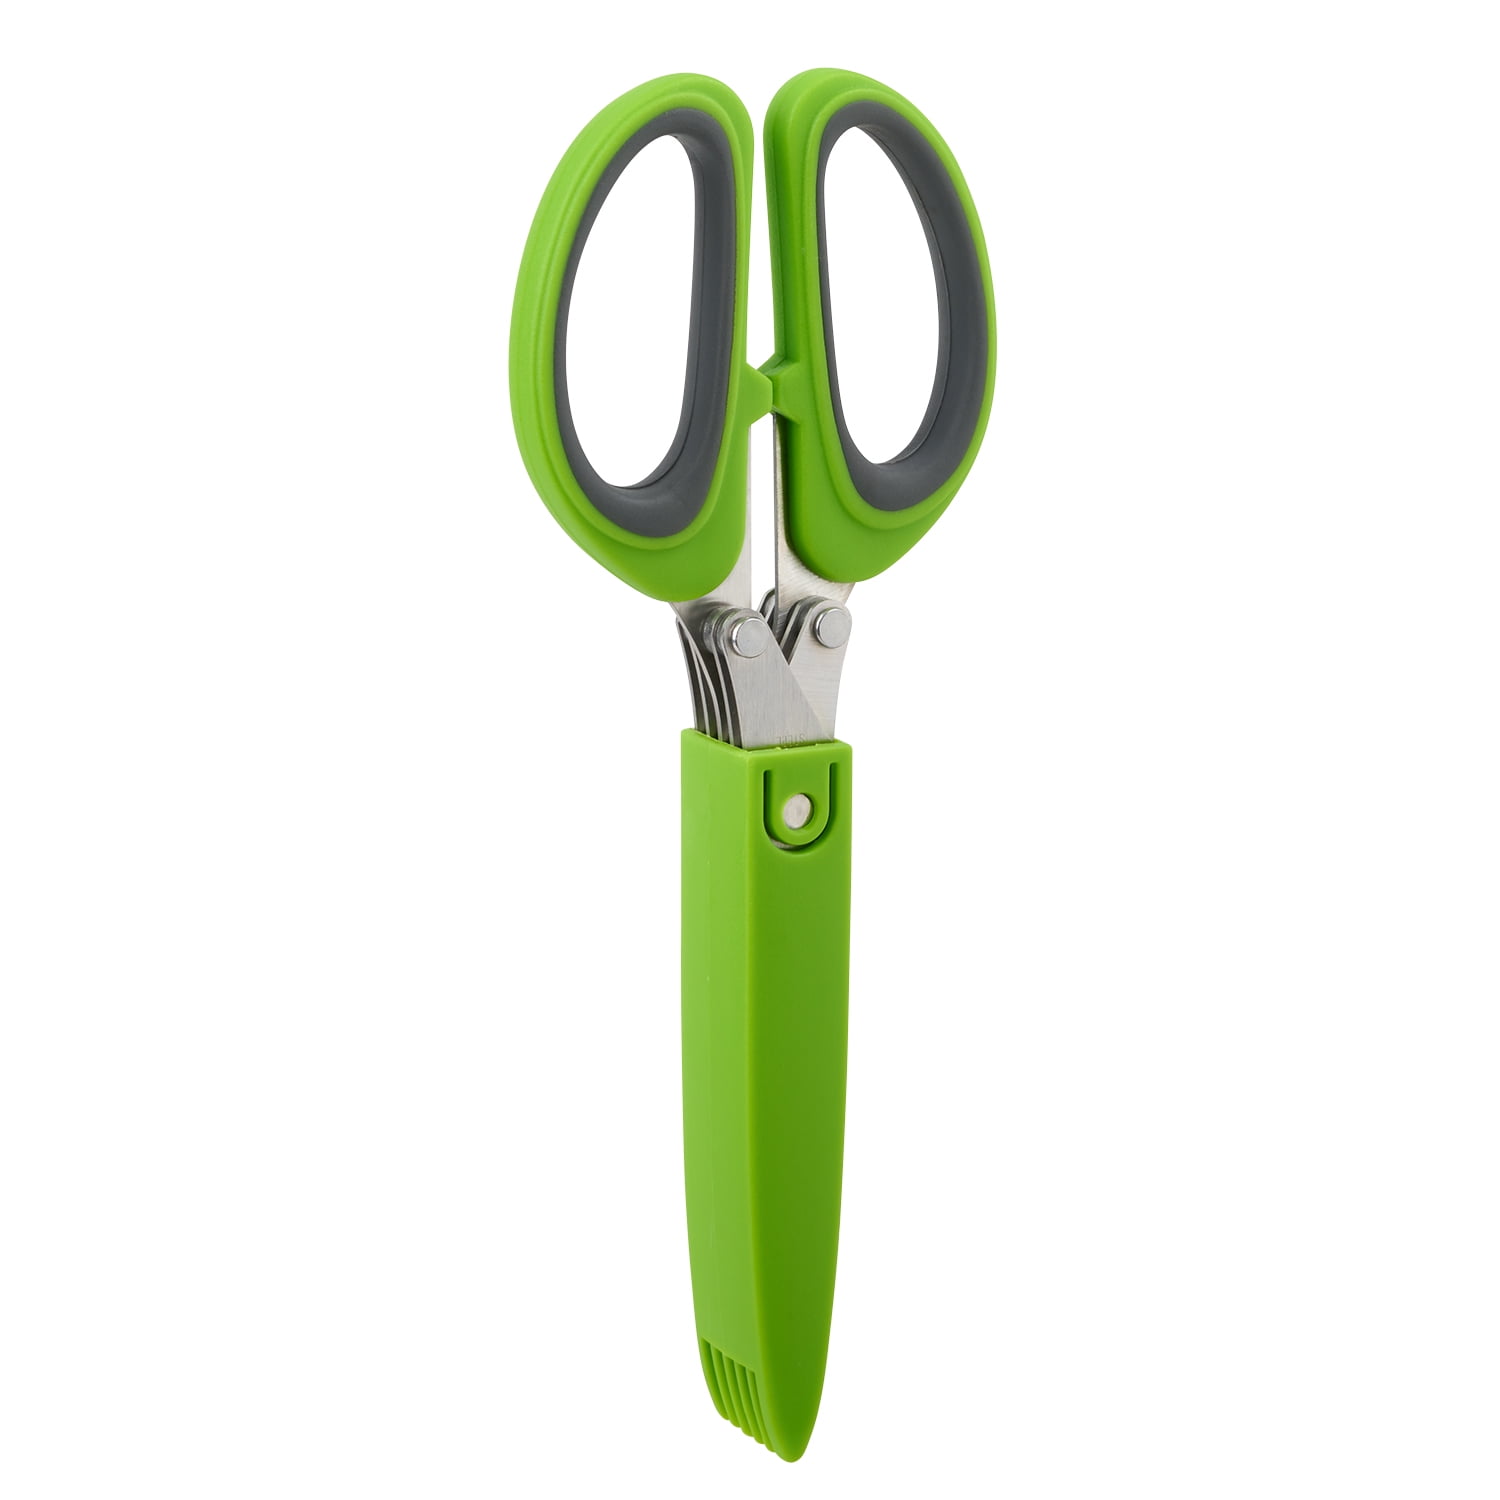 2Pcs Herb Cutter Scissors, Casewin 5 Blade/3 Blade Scissors Kitchen  Multipurpose Cutting Shear with Safety Cover & Cleaning Comb Cilantro  Scissors(Green) 